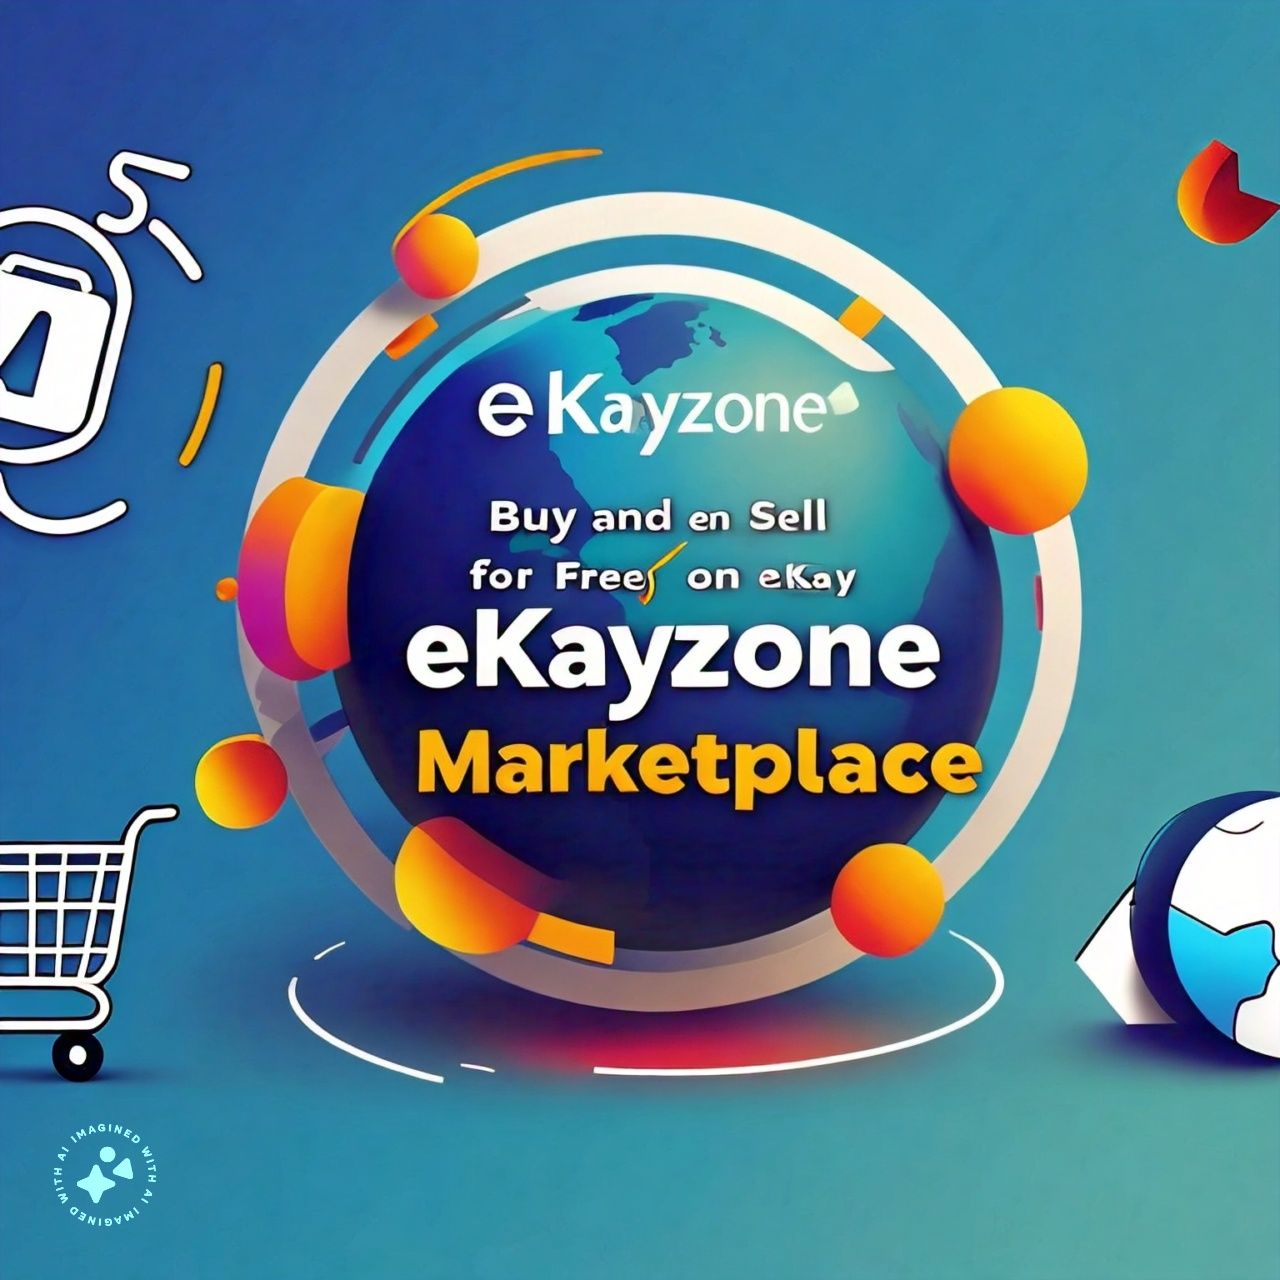 The benefits of advertising your Travel and Tourism, hotel, Lodge and Guest House on eKayzone